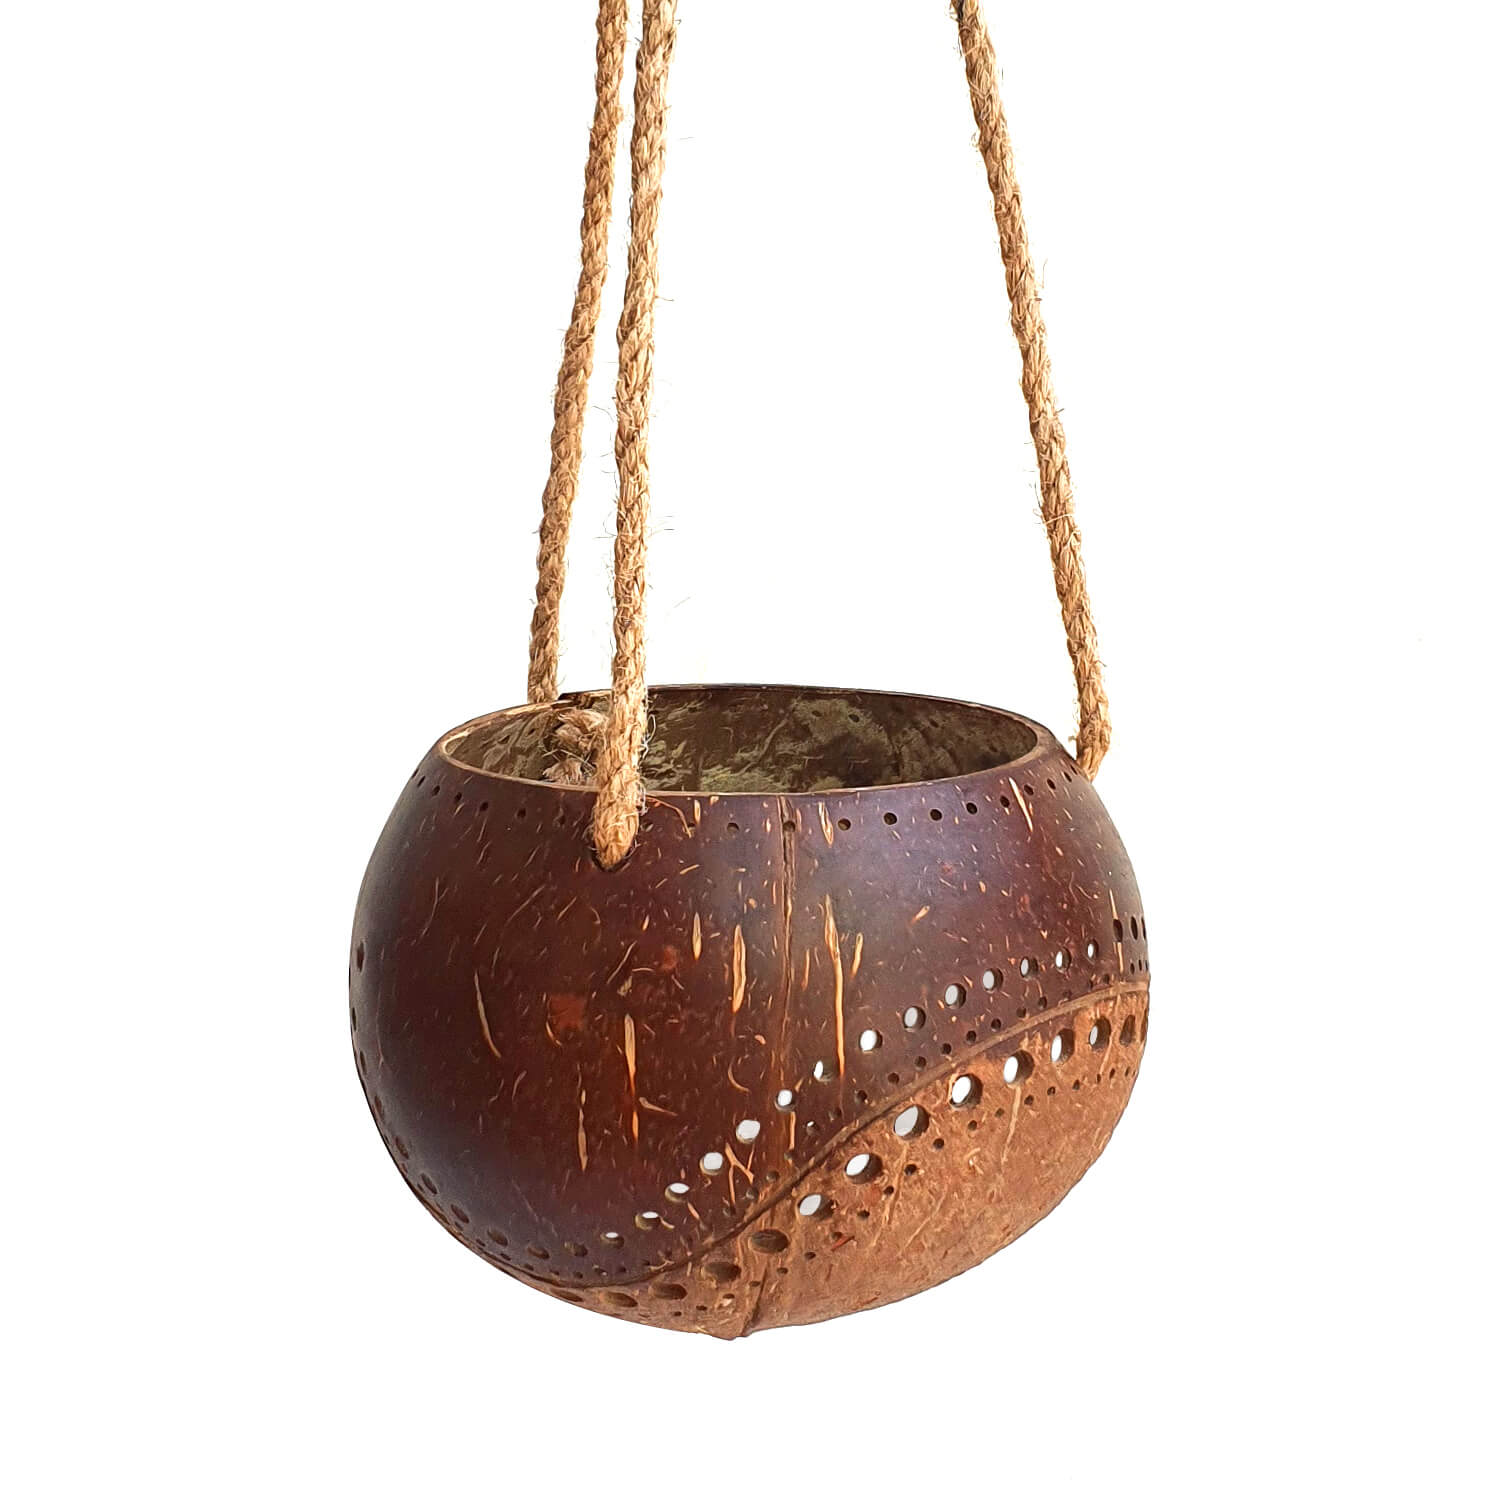 Hanging Two-Toned Coconut Planter